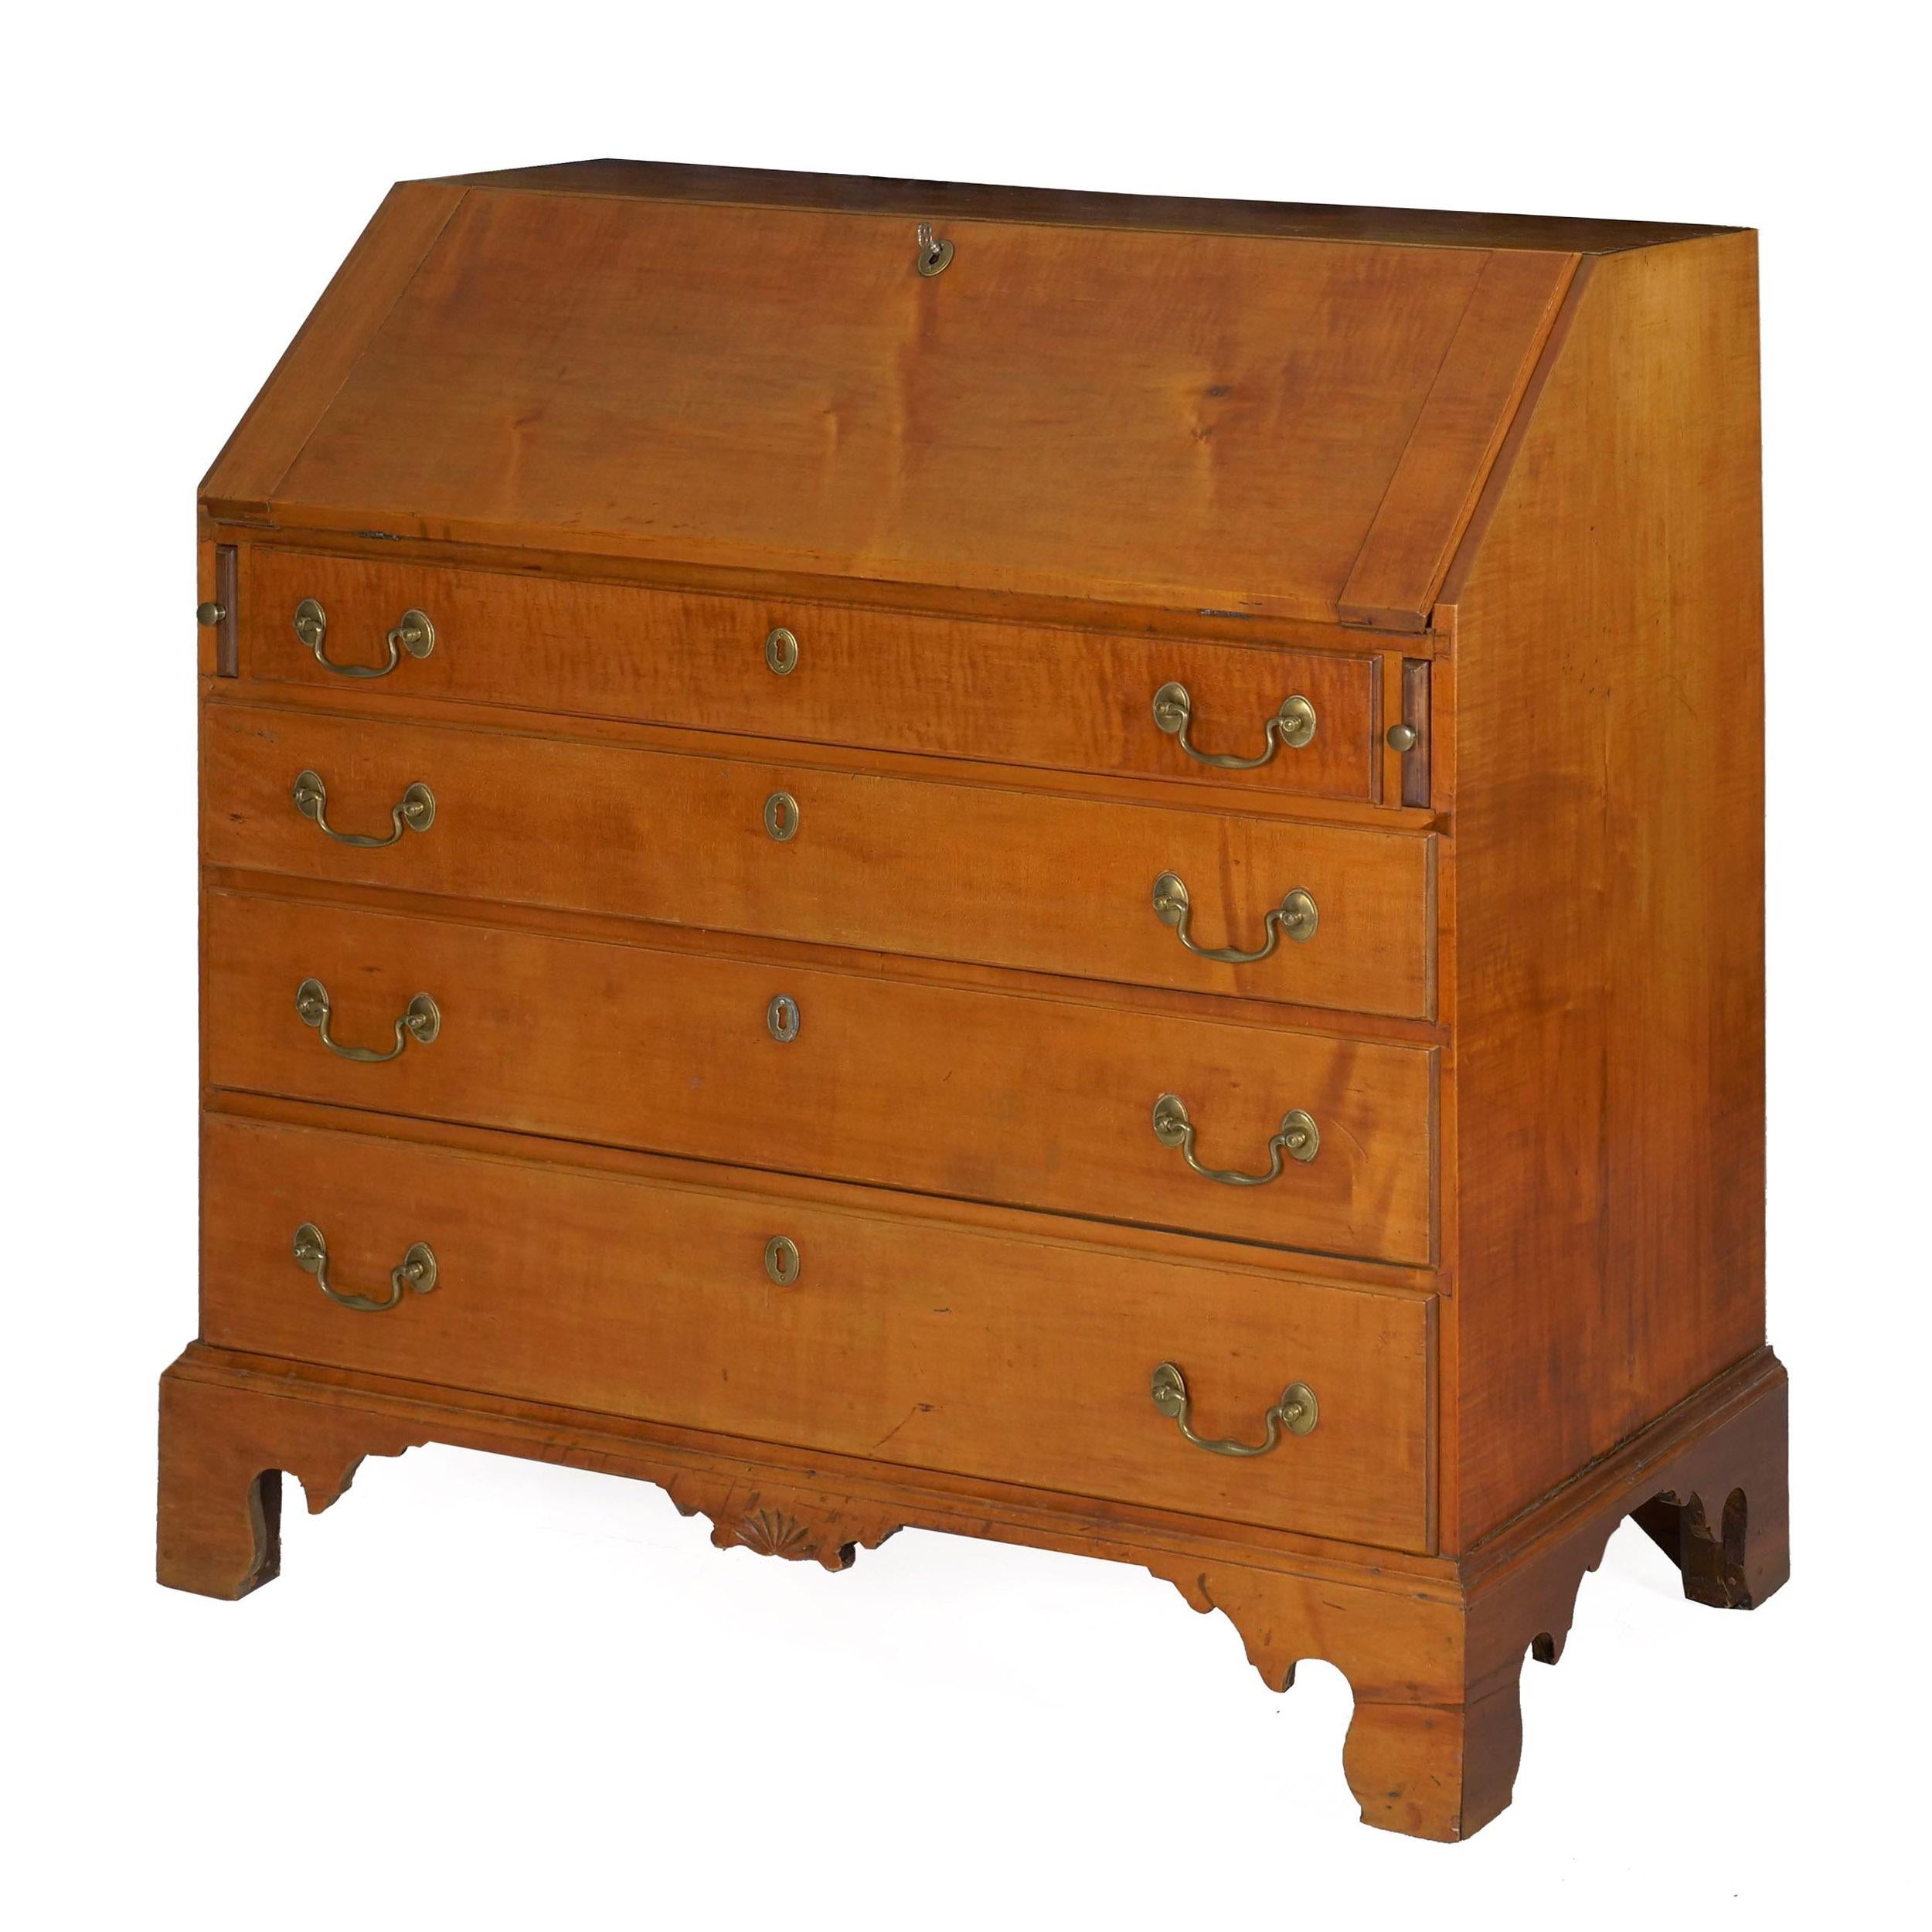 American Chippendale maple slant-front writing desk
Massachusetts, circa 1780
Item # 010KIO06M 

A Fine writing desk that likely originates on the North Shore of Massachusetts circa the last quarter of the 18th century, it is an iconic example